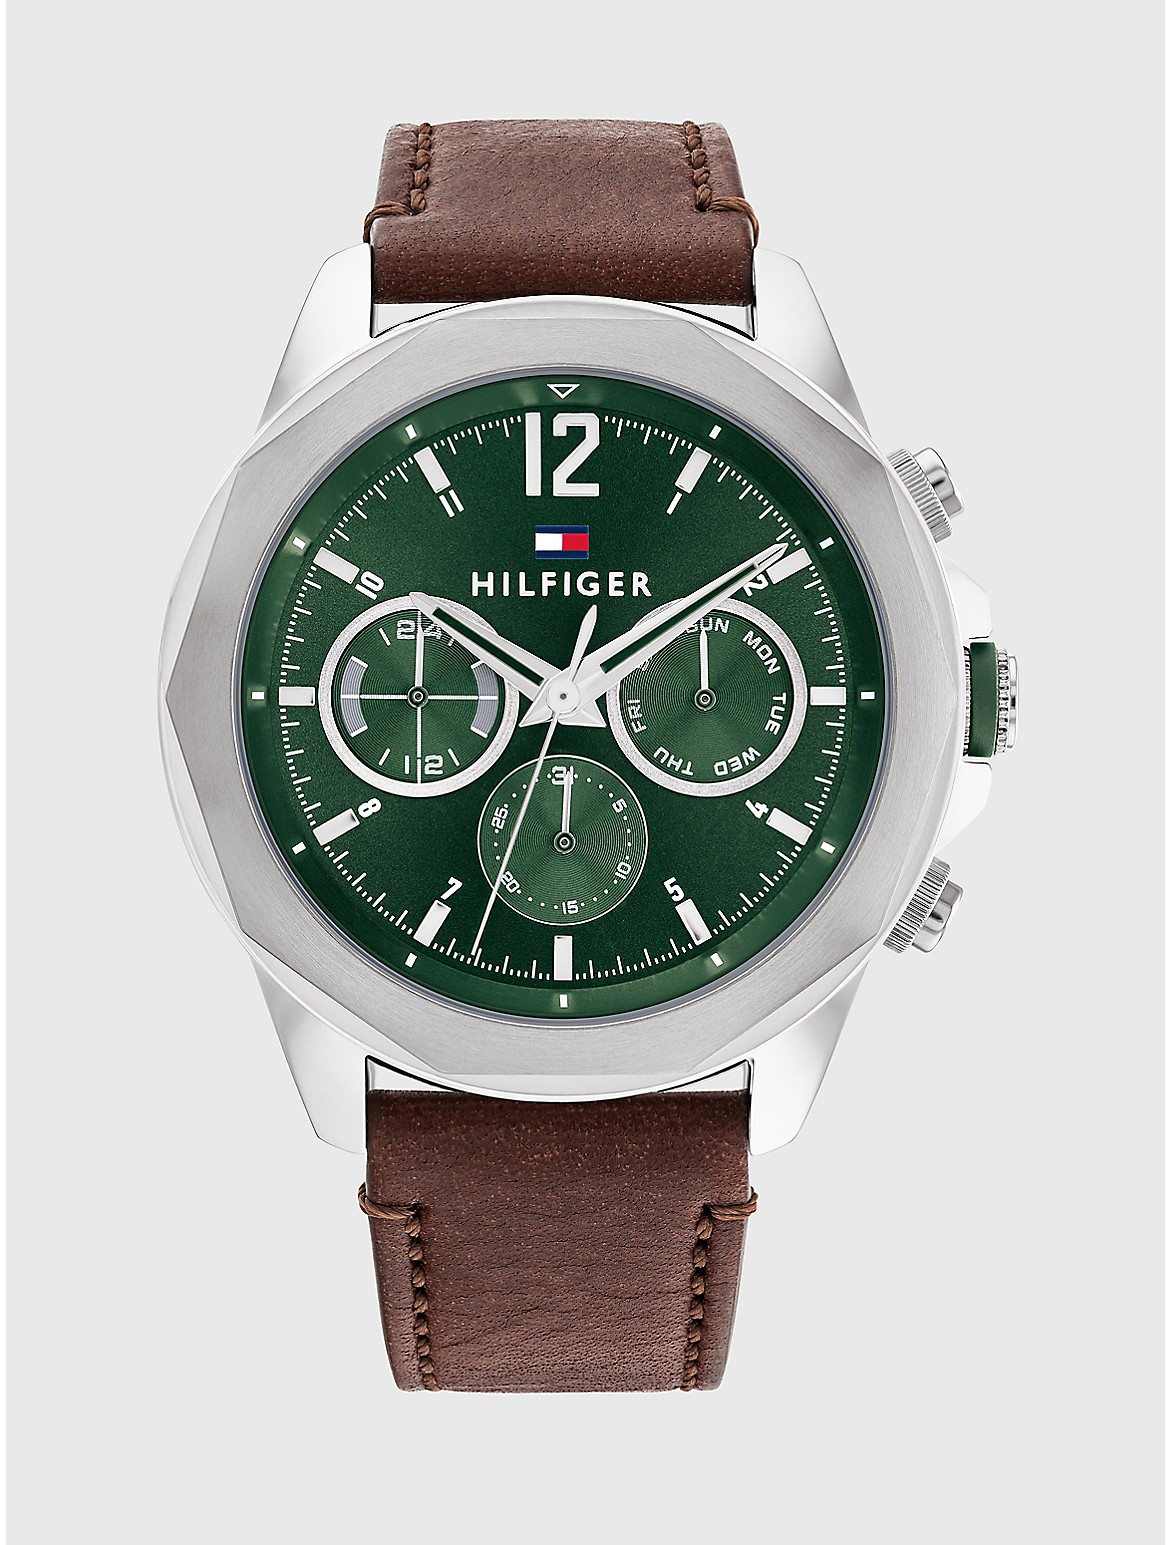 Tommy Hilfiger Men's Sport Watch with Brown Leather Strap - Green